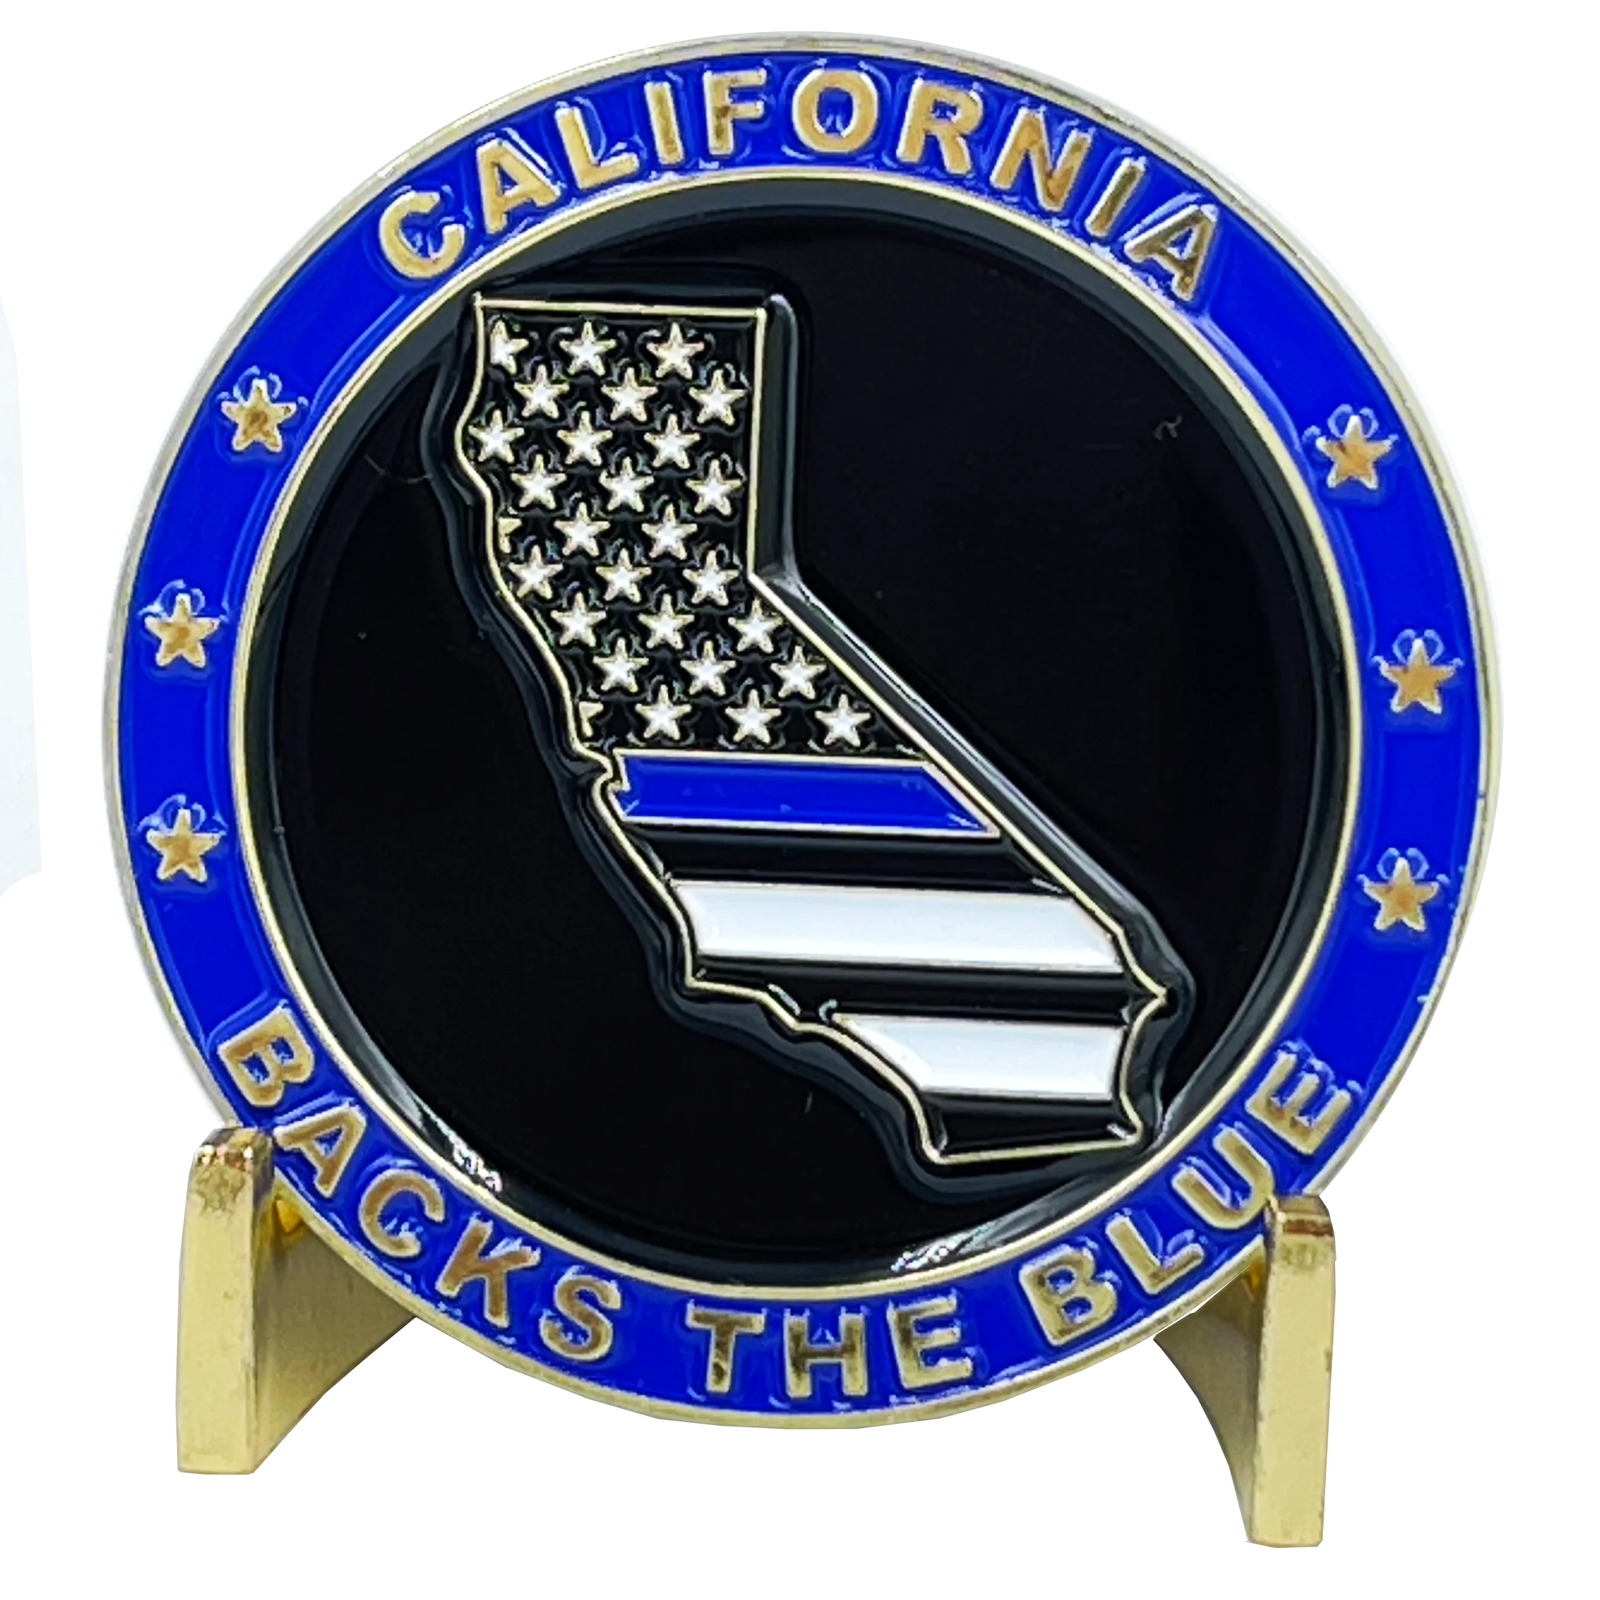 BL3-003 California BACKS THE BLUE Thin Blue Line Police Challenge Coin with free